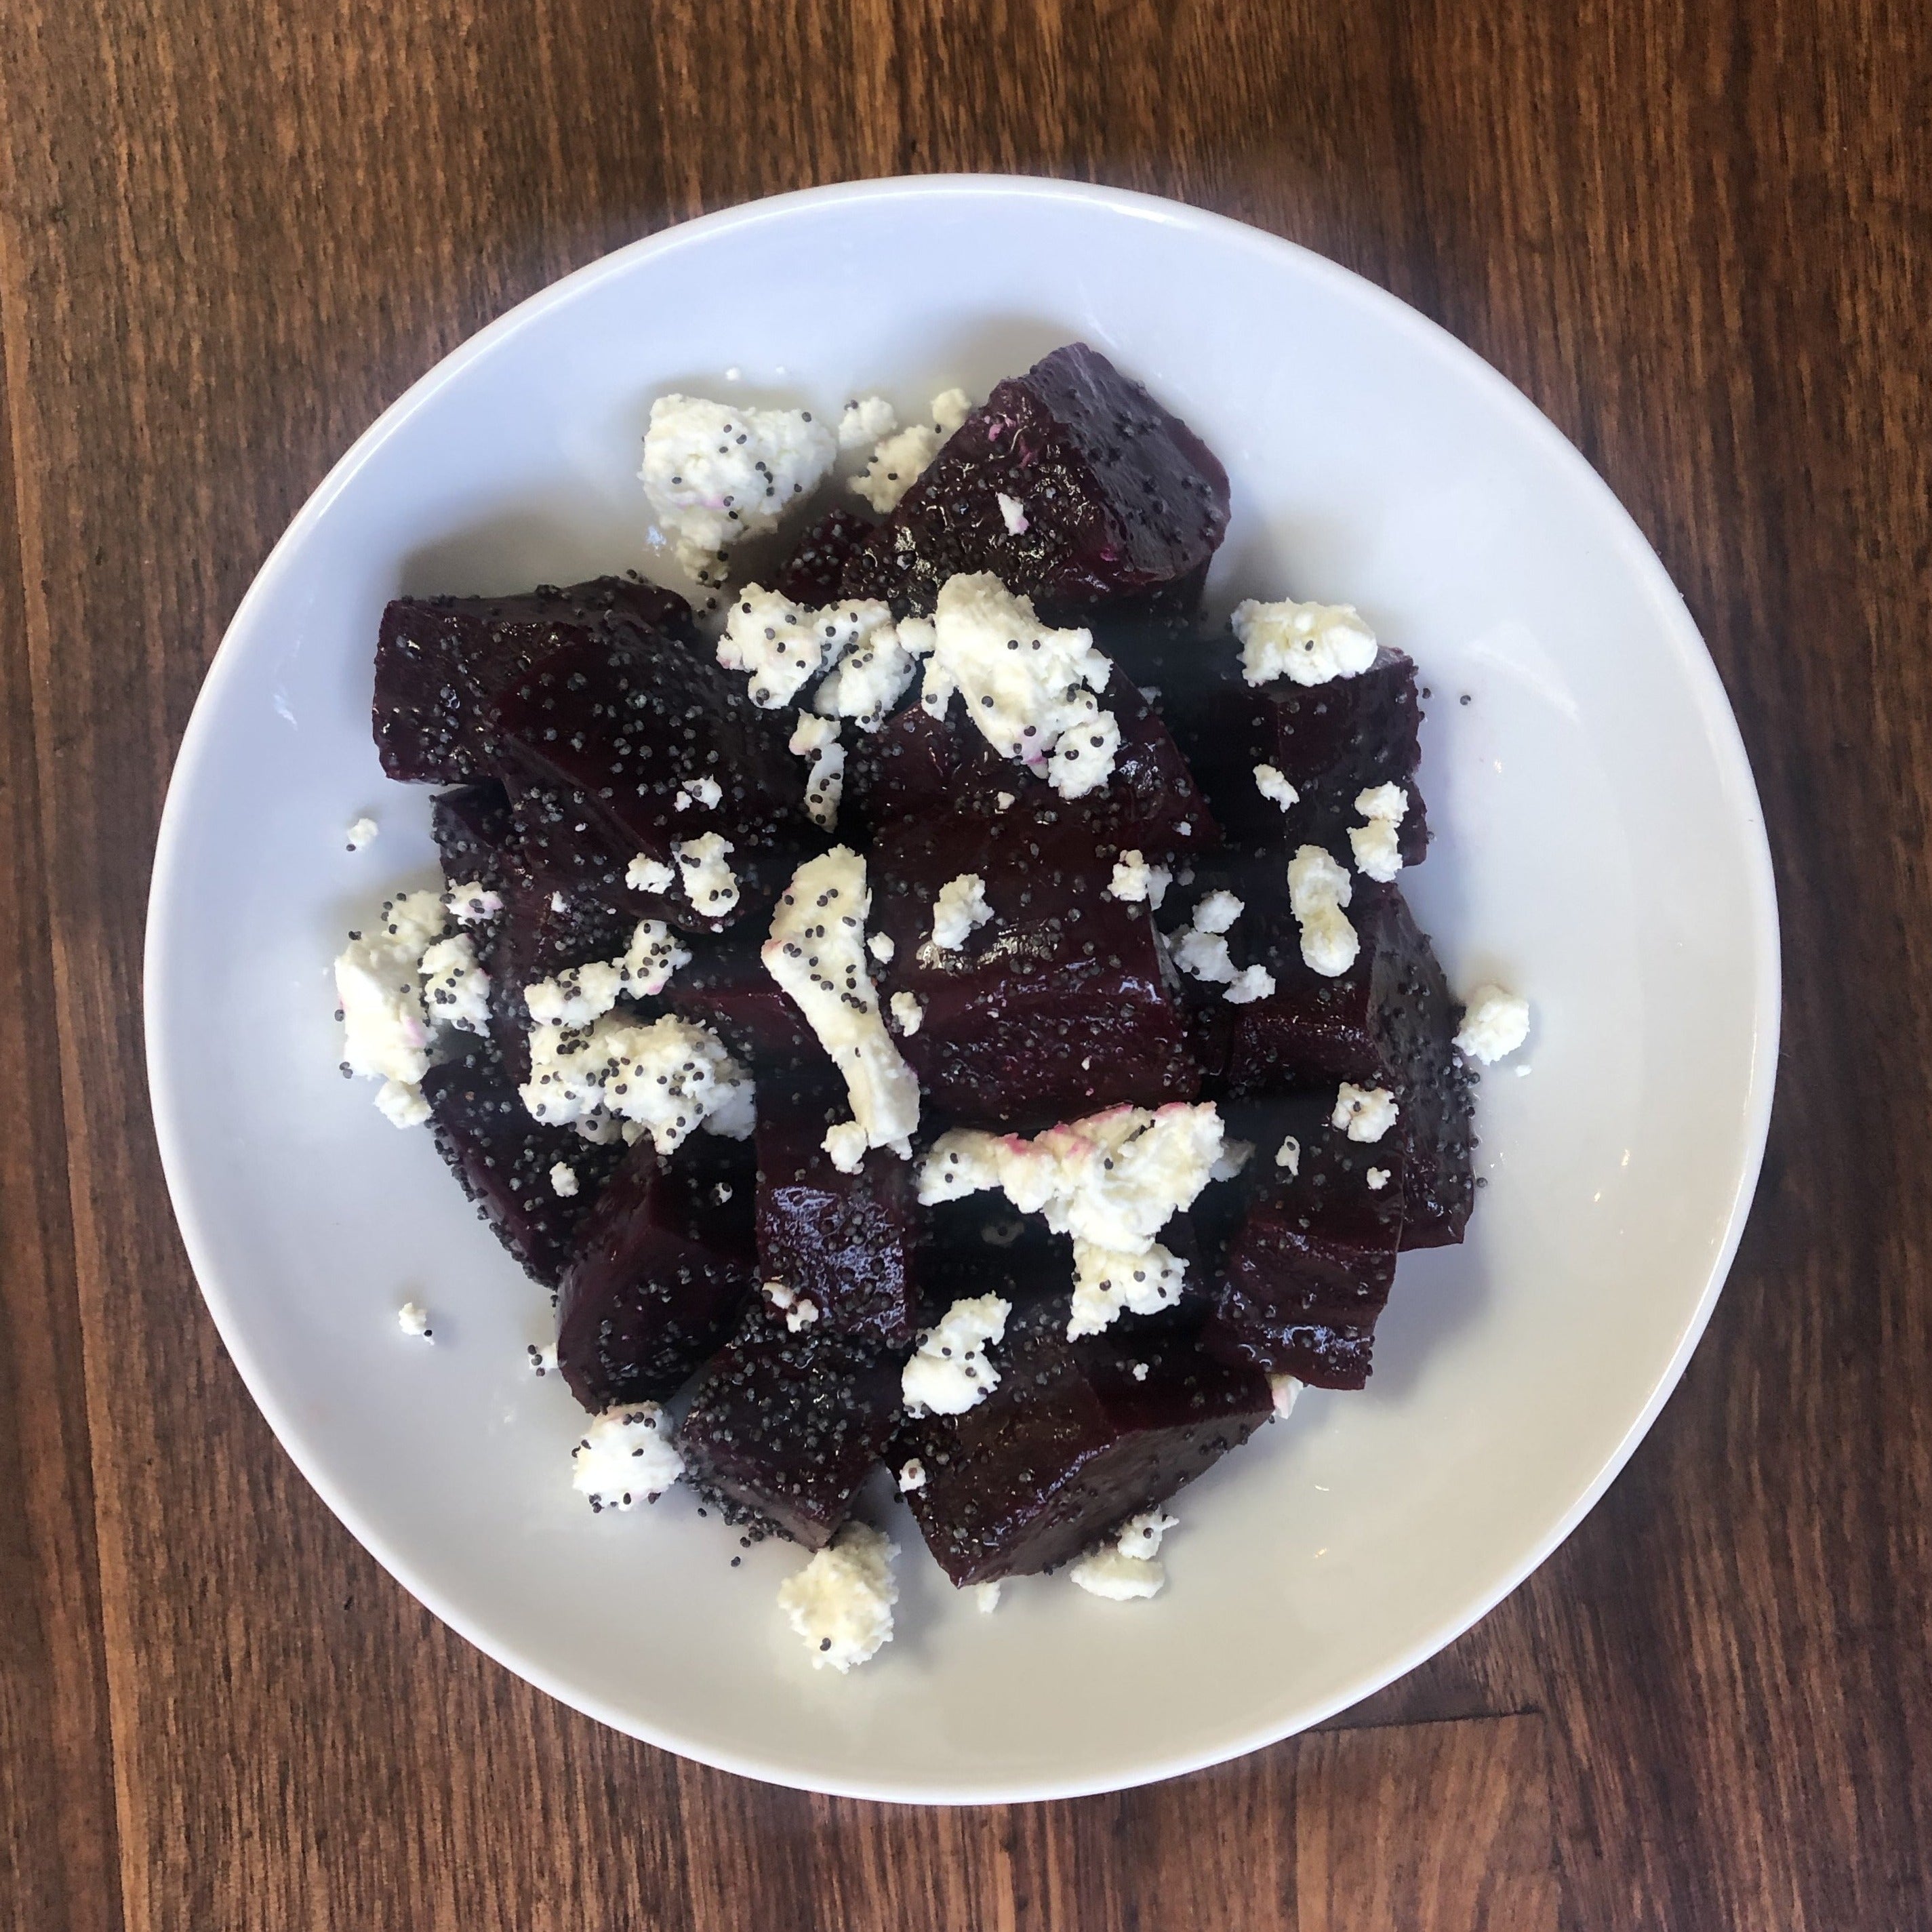 Farmshop, Marinated Beets with Chevre & Poppy Seeds, 8 oz